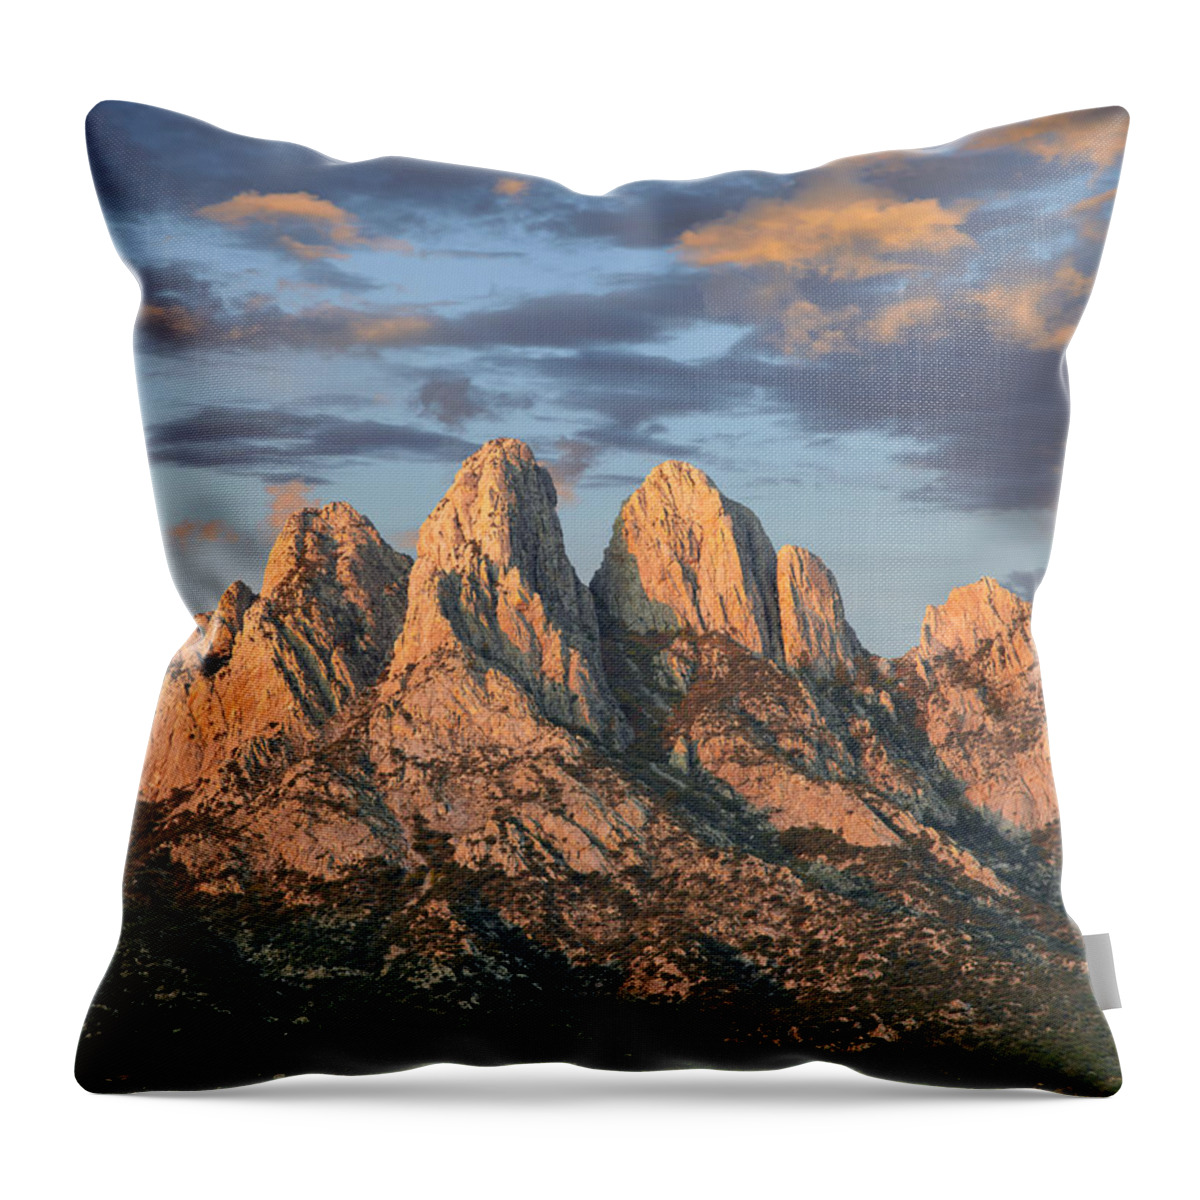 00438928 Throw Pillow featuring the photograph Organ Mountains Near Las Cruces New by Tim Fitzharris